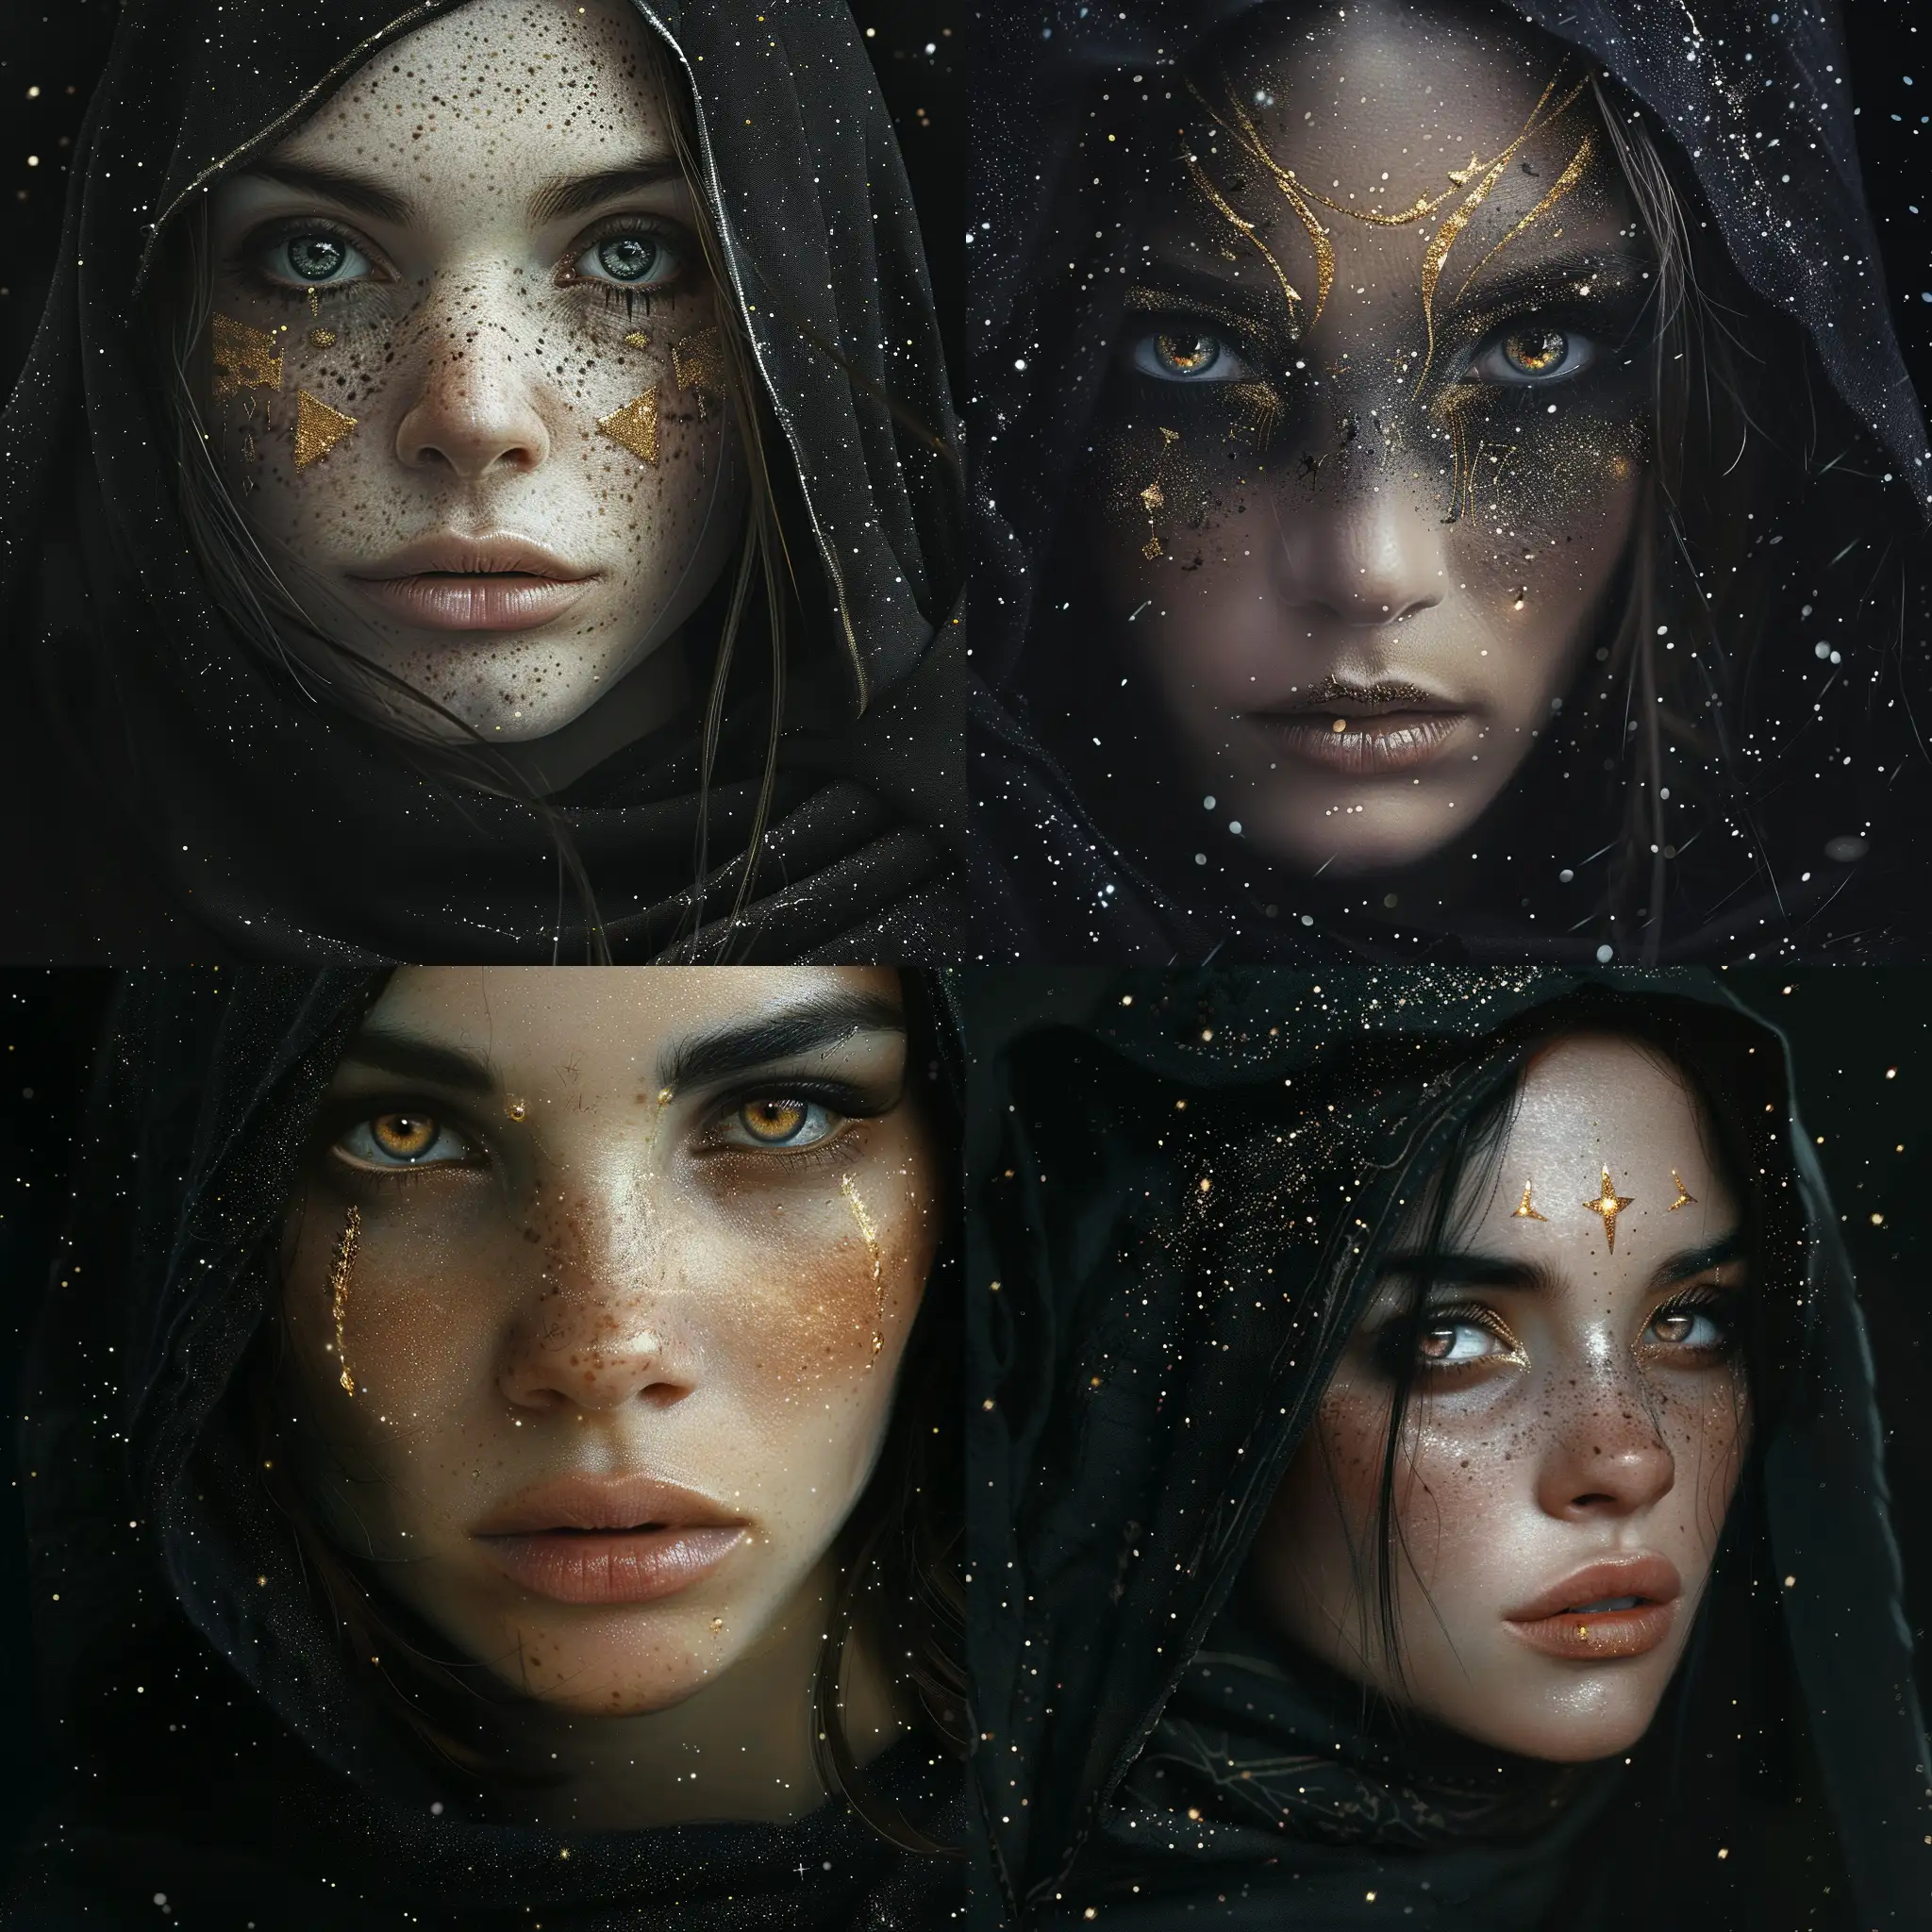 Enigmatic-Medieval-Woman-with-Gold-Markings-in-Surreal-Fantasy-Setting